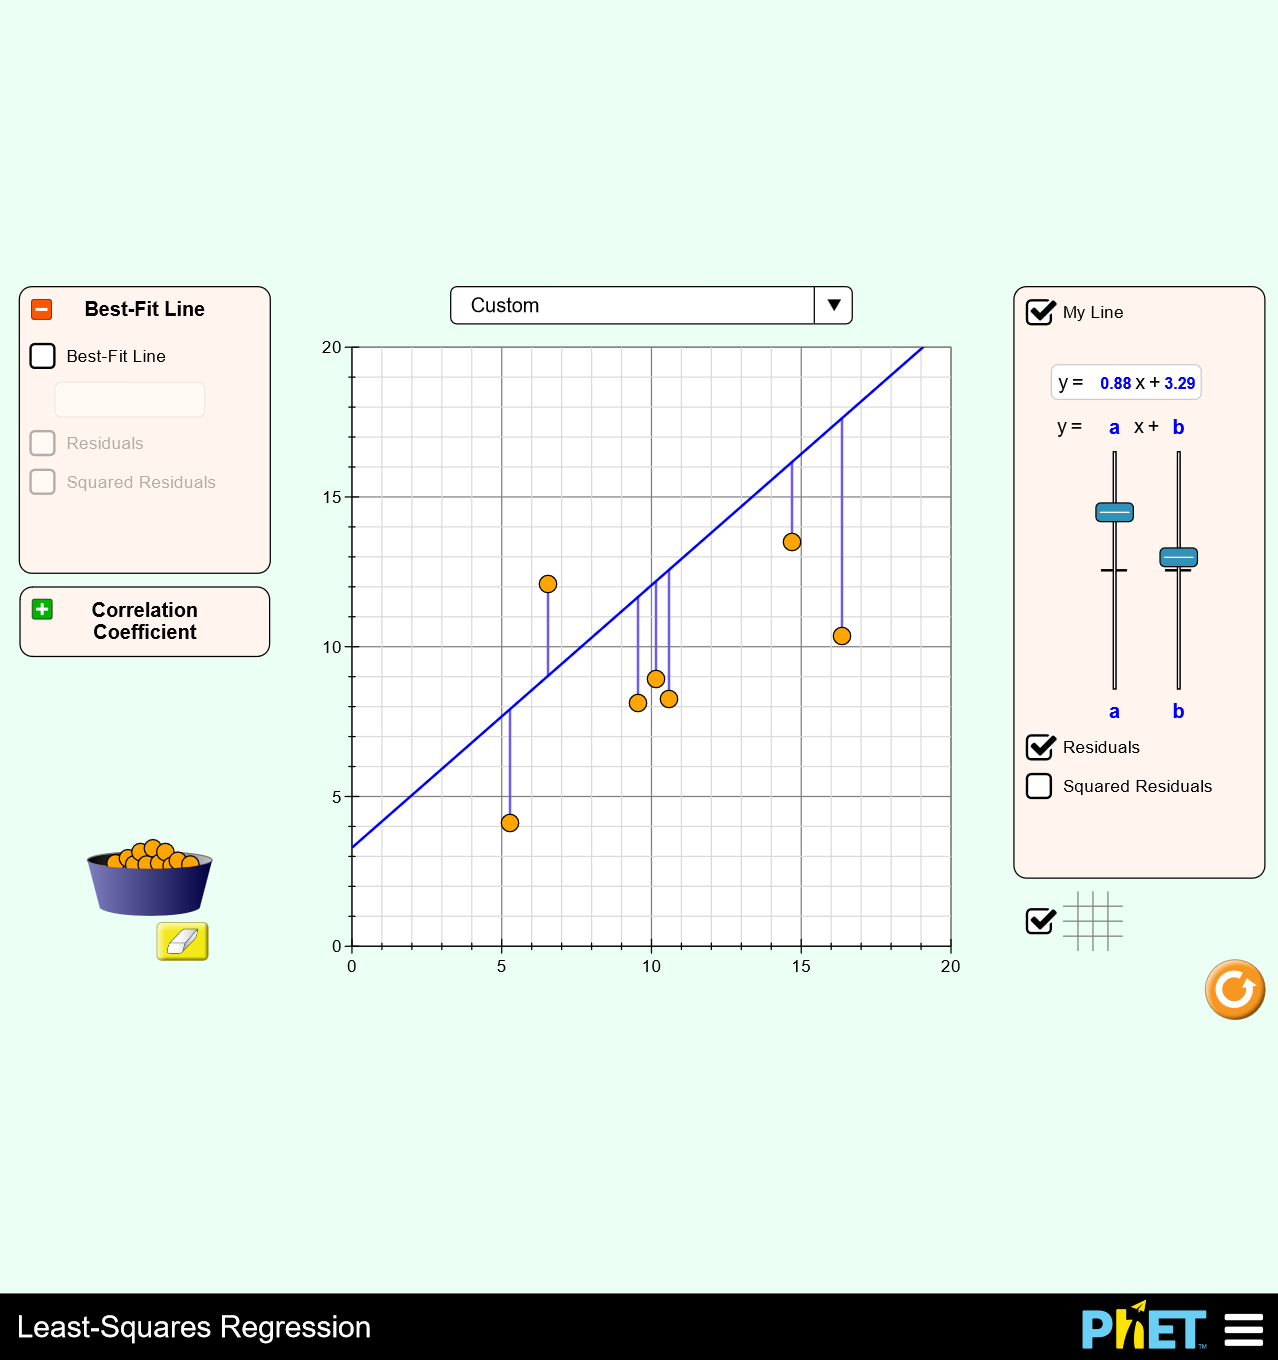 Screenshot from [PhEt Interactive Simulations](http://phet.colorado.edu/sims/html/least-squares-regression/latest/least-squares-regression_en.html). The vertical lines visualize the error of the regression slope to the real observations.